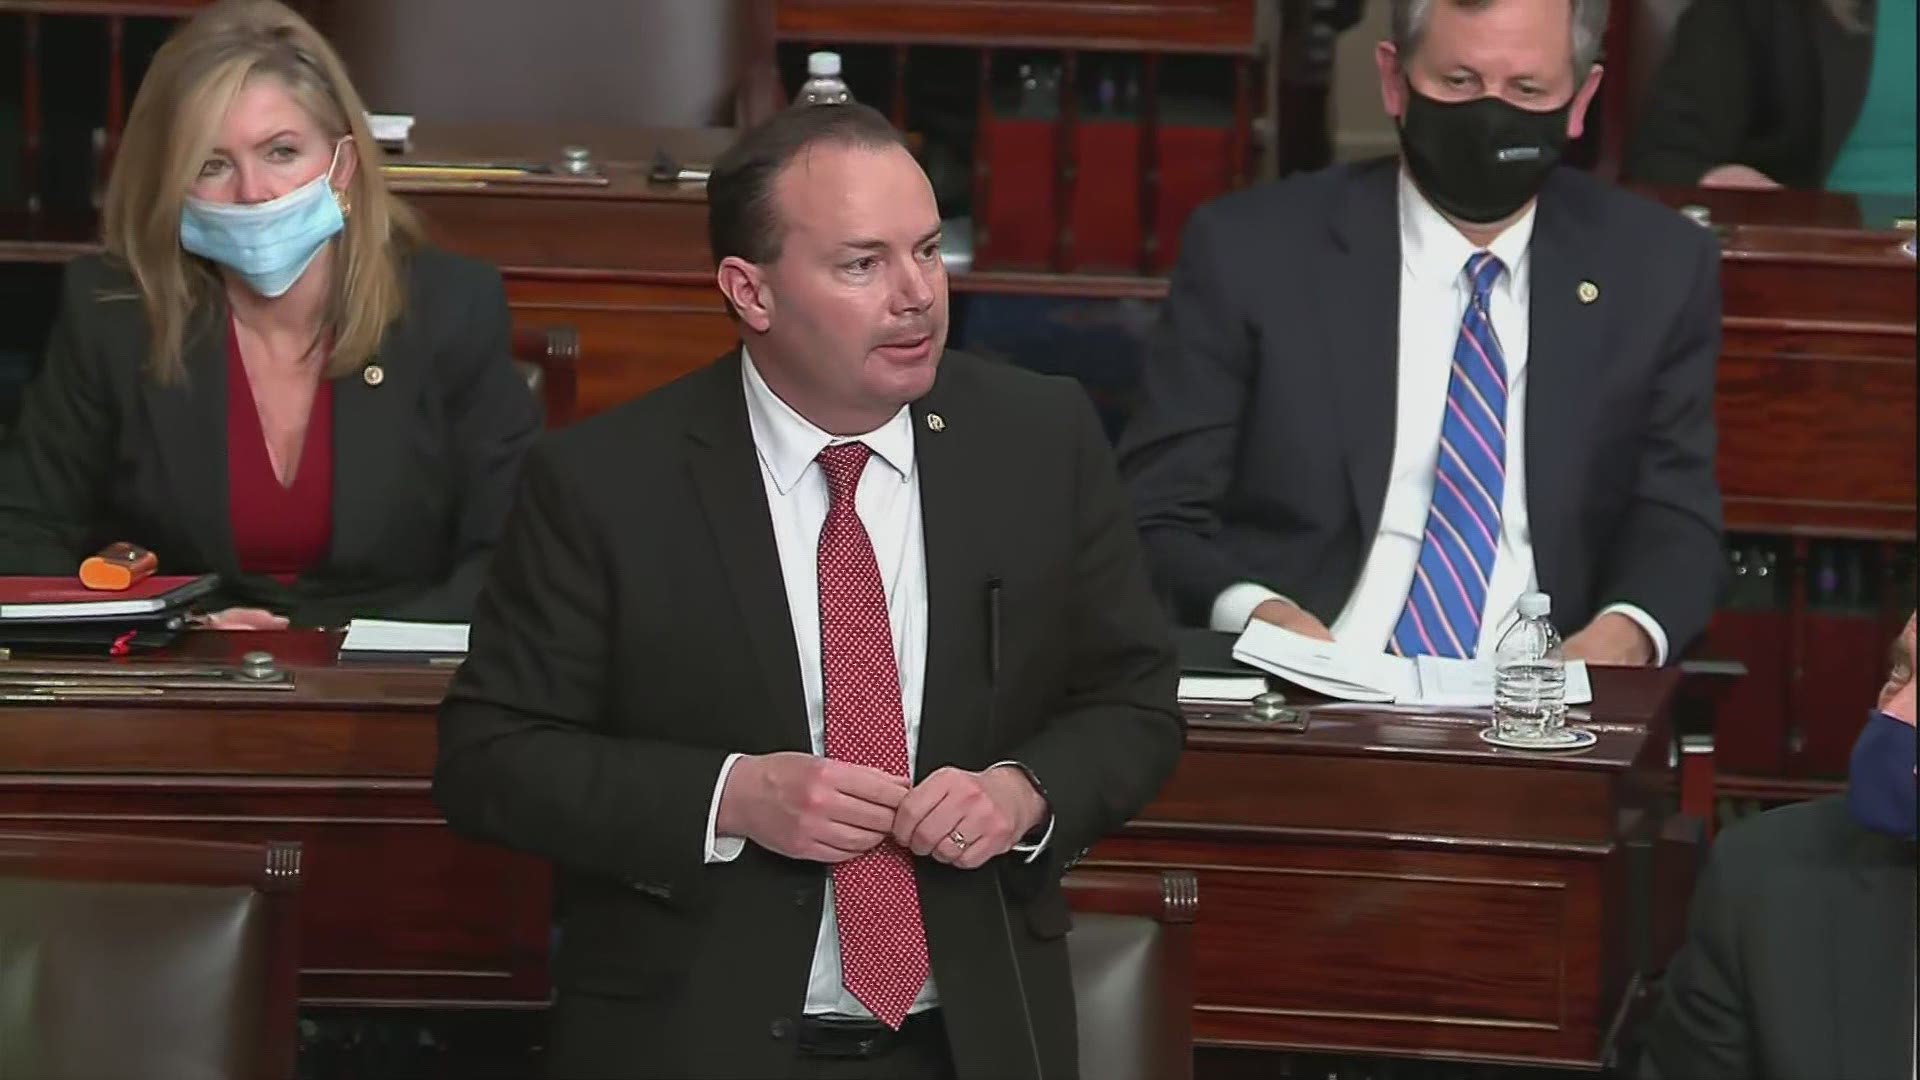 Sen. Mike Lee, R-Utah, objected to arguments made by House impeachment managers, saying he did not make comments the managers claimed.